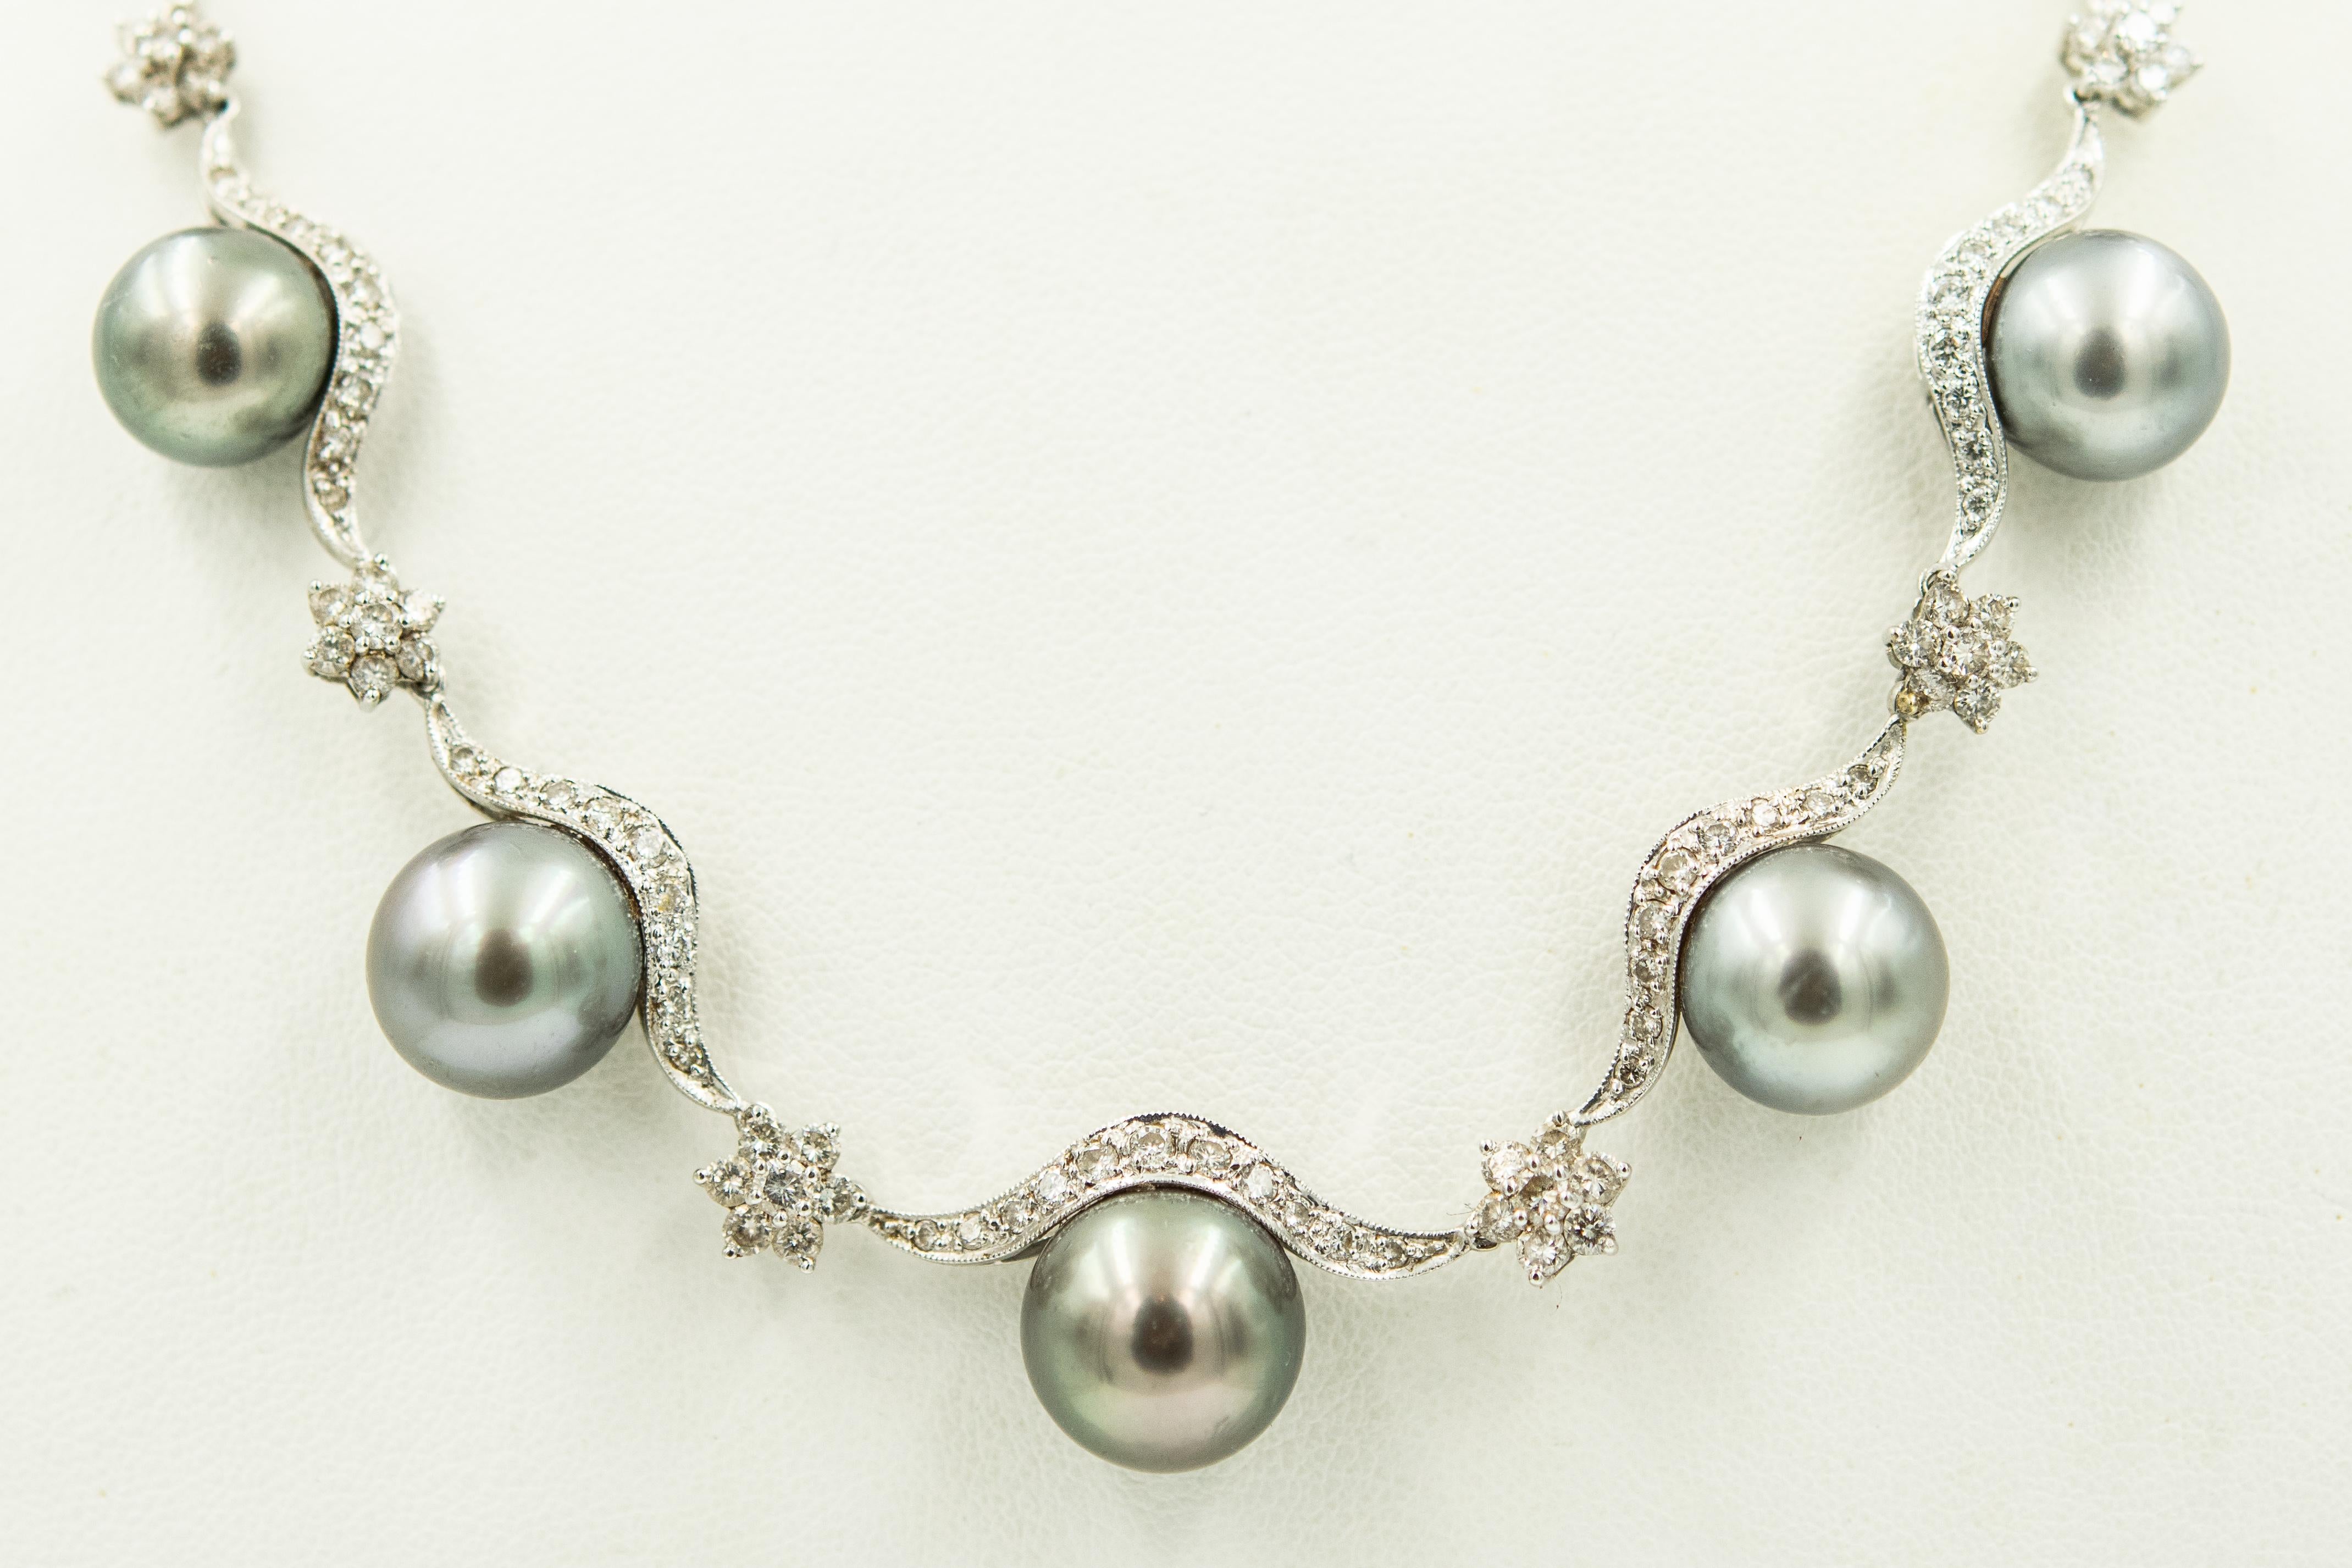 18k white gold necklace with diamond swags or scallops with diamond flower spacers and five graduating gray round cultured pearls draping across the front.  The necklace has a plunger clasp with a figure eight safety. The pearls measure